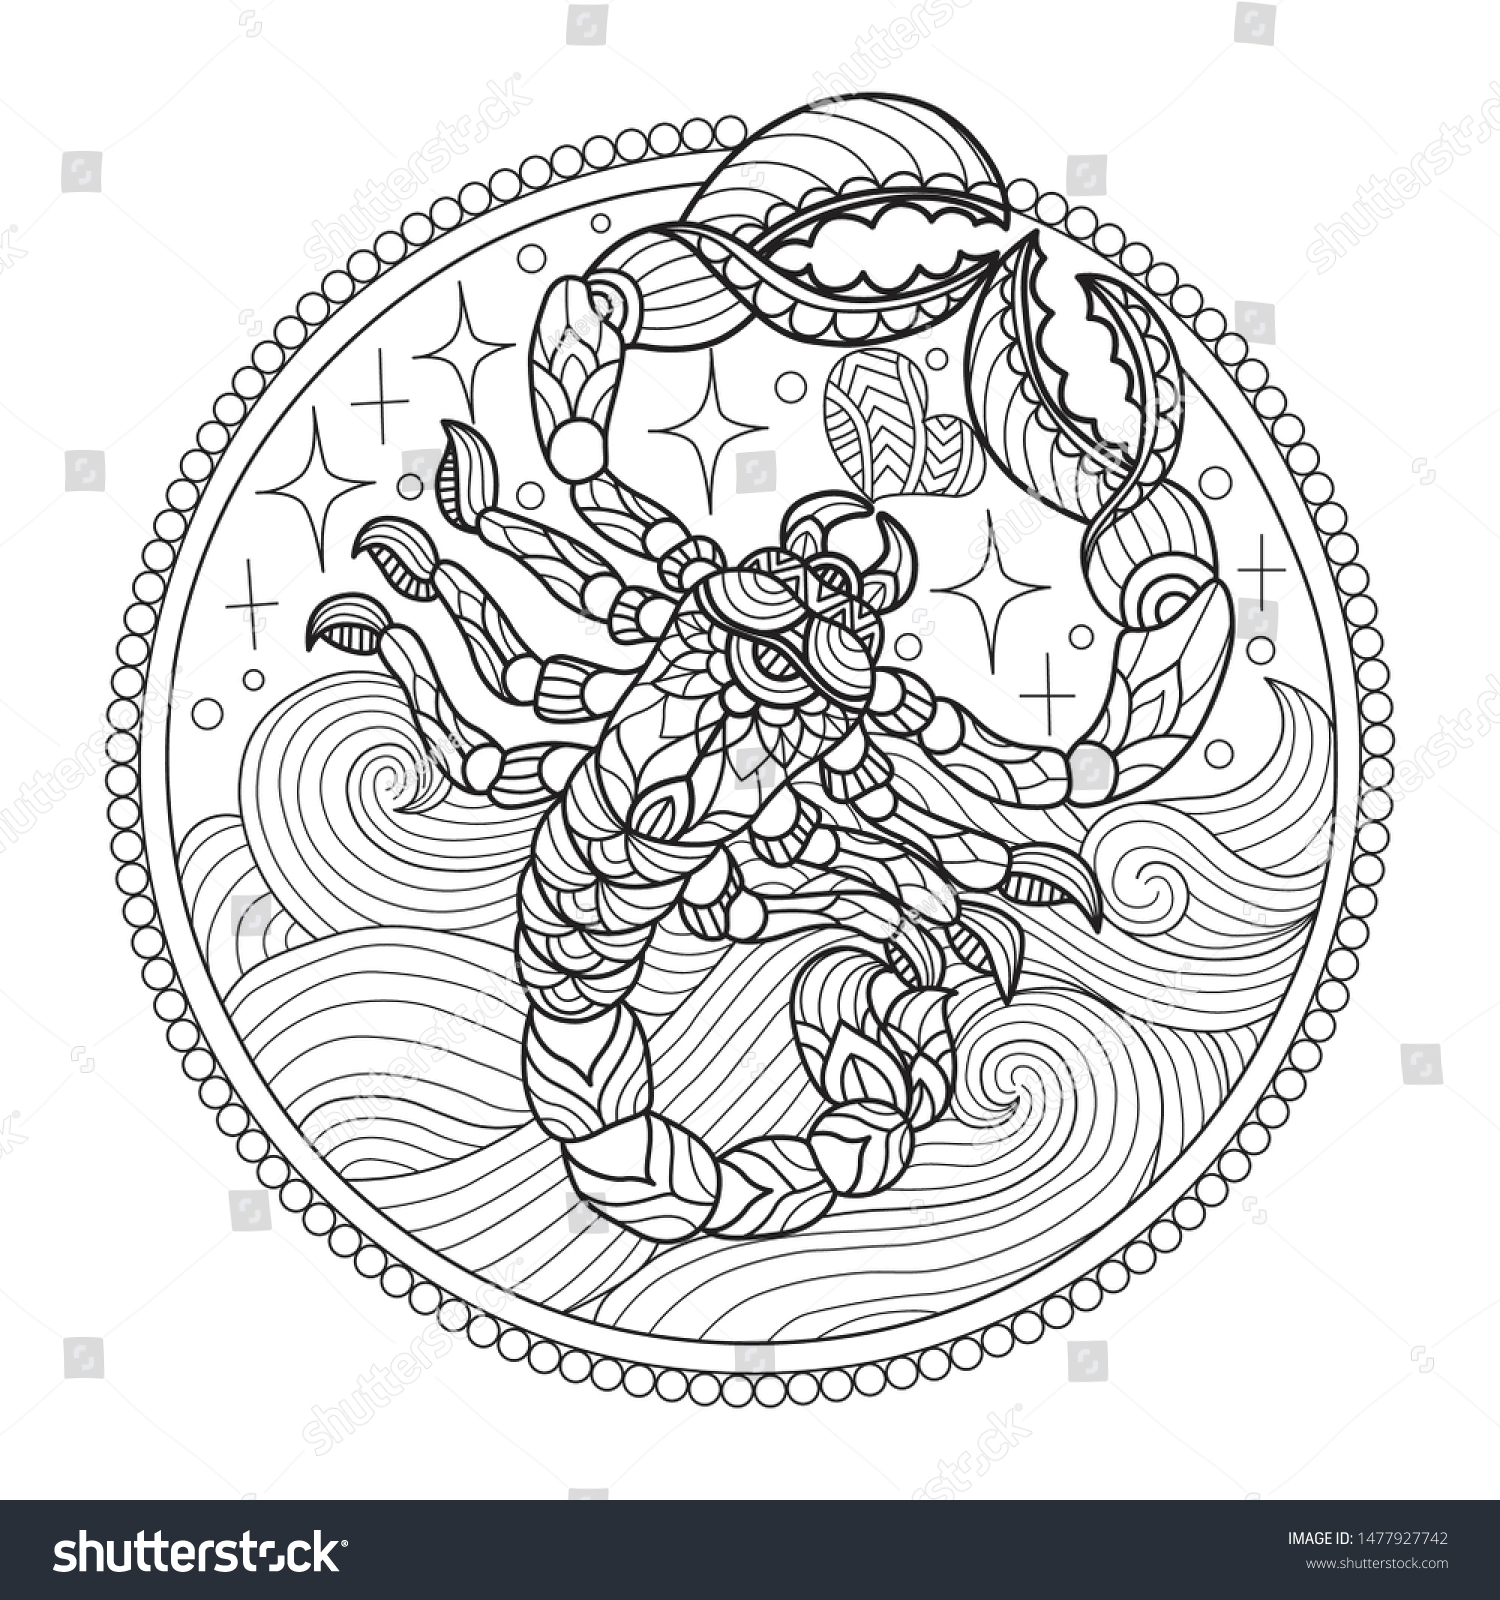 Scorpio coloring page images stock photos d objects vectors